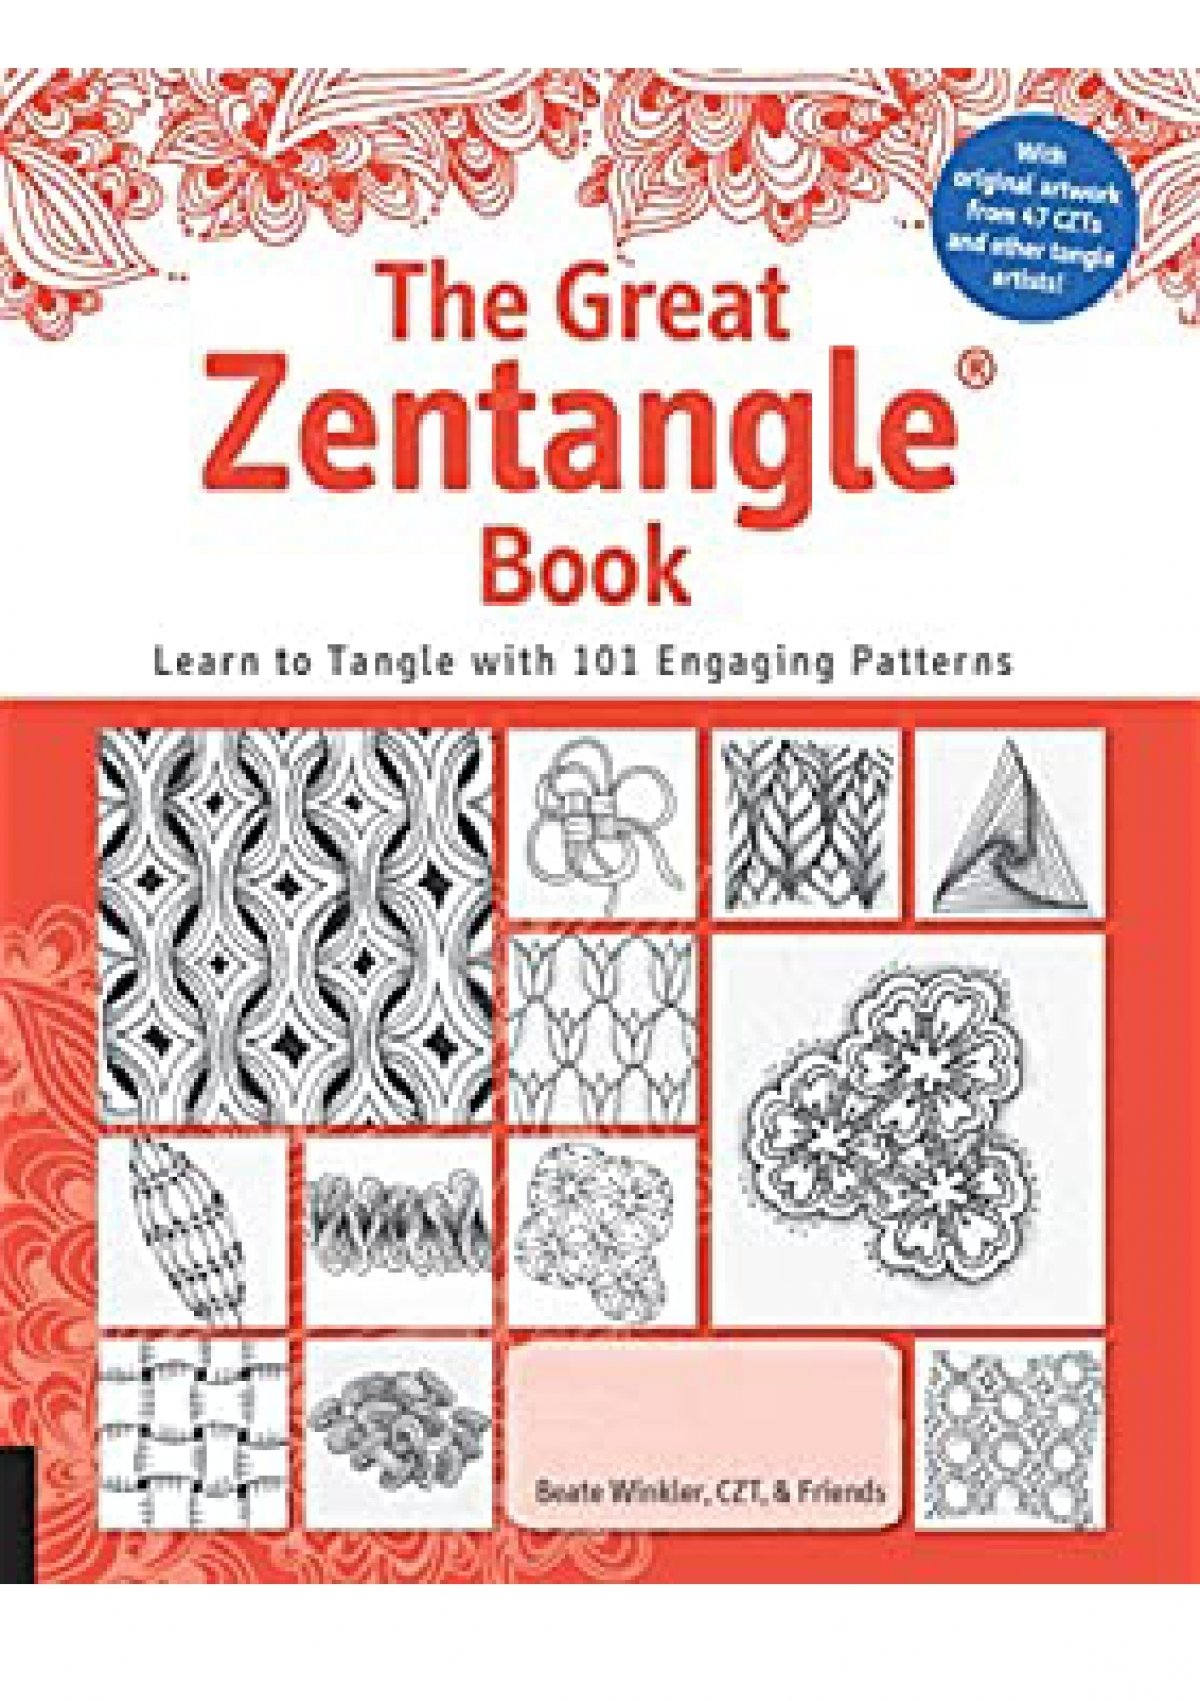 Pdf Read Free The Great Zentangle Book Learn To Tangle With 101 Favorite Patterns Ebook Pdf